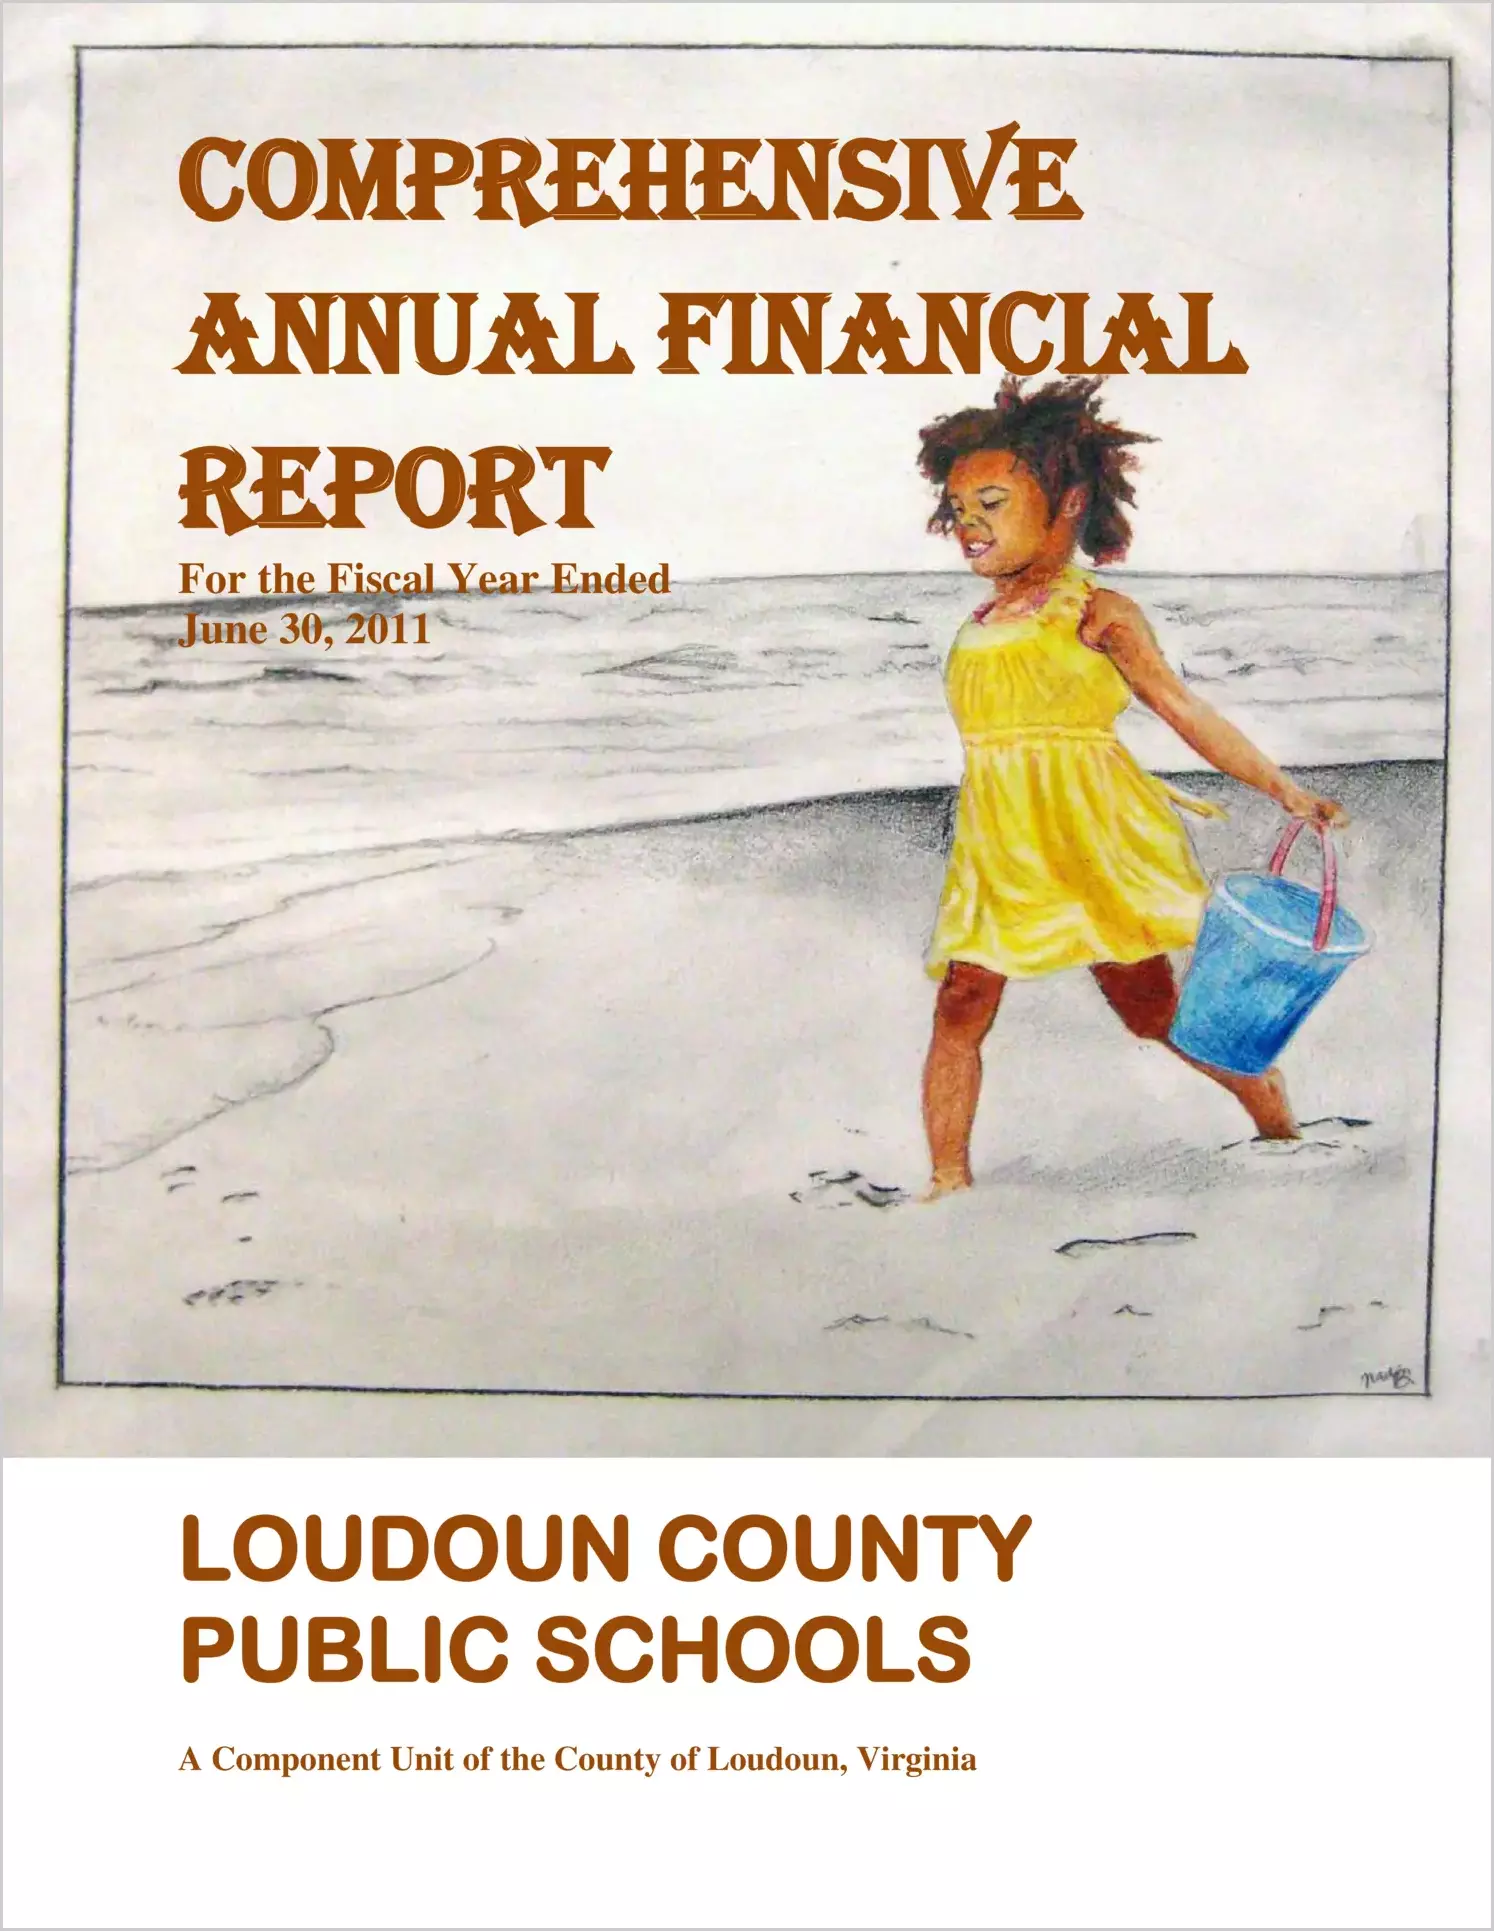 2011 Public Schools Annual Financial Report for County of Loudoun